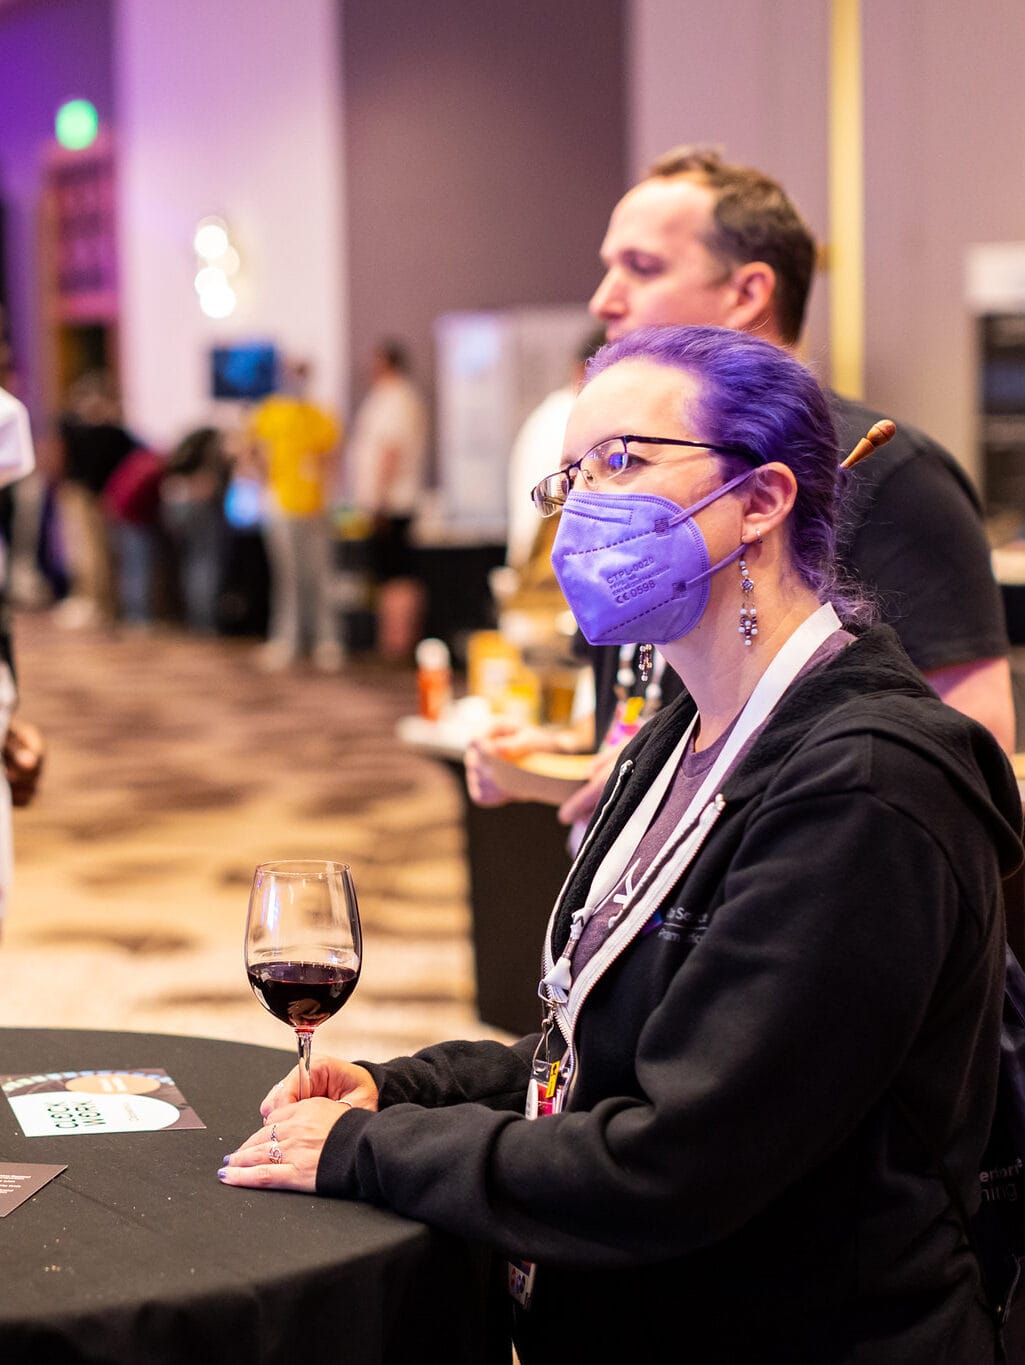 Woman with purple hair, glasses, and a purple mask leans agains a table with a glass of red wine.